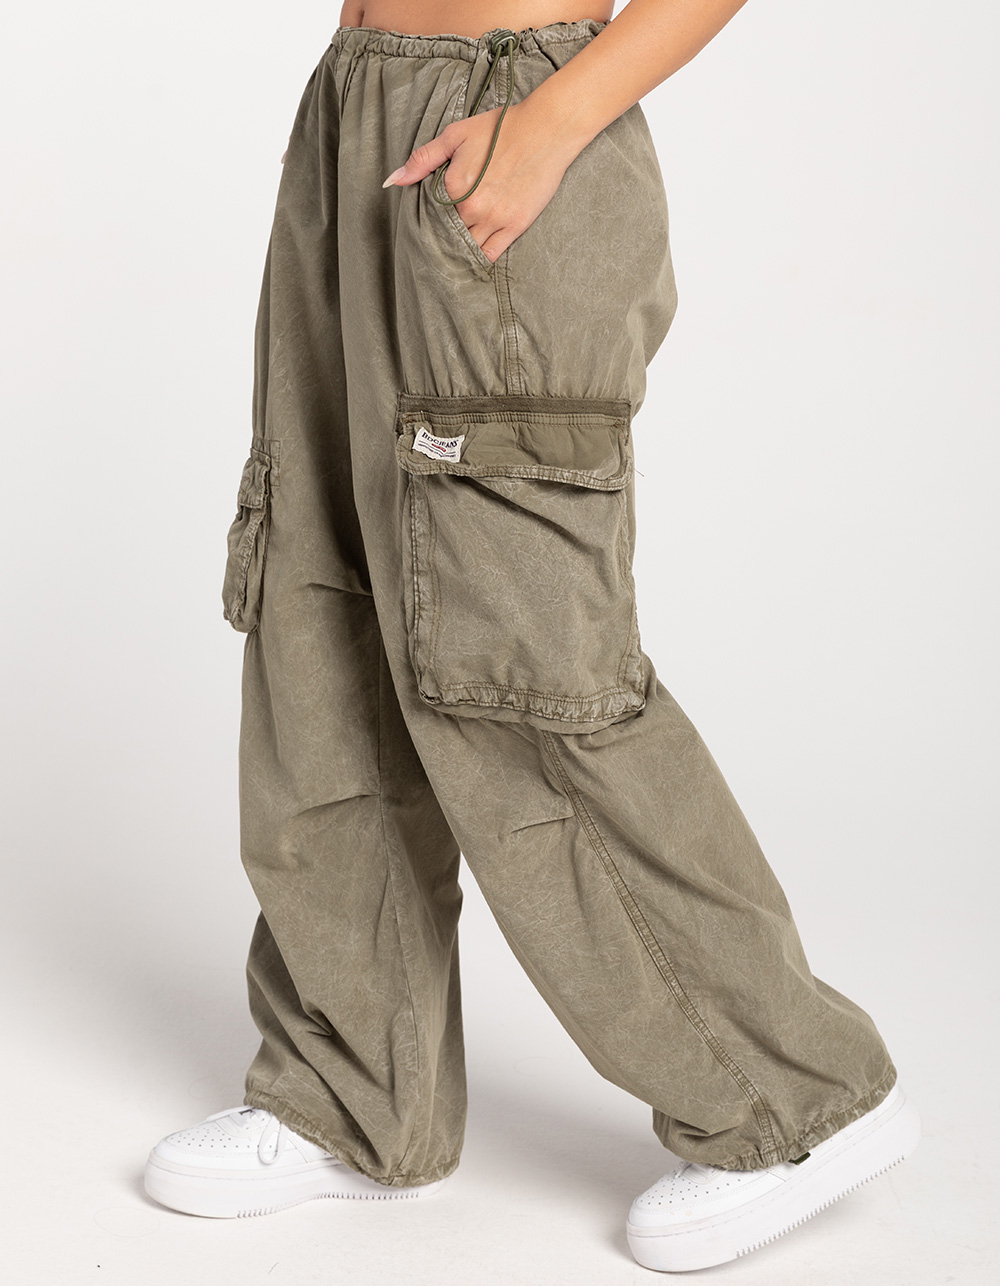 BDG Urban Outfitters Maxi Pocket Womens Tech Pants